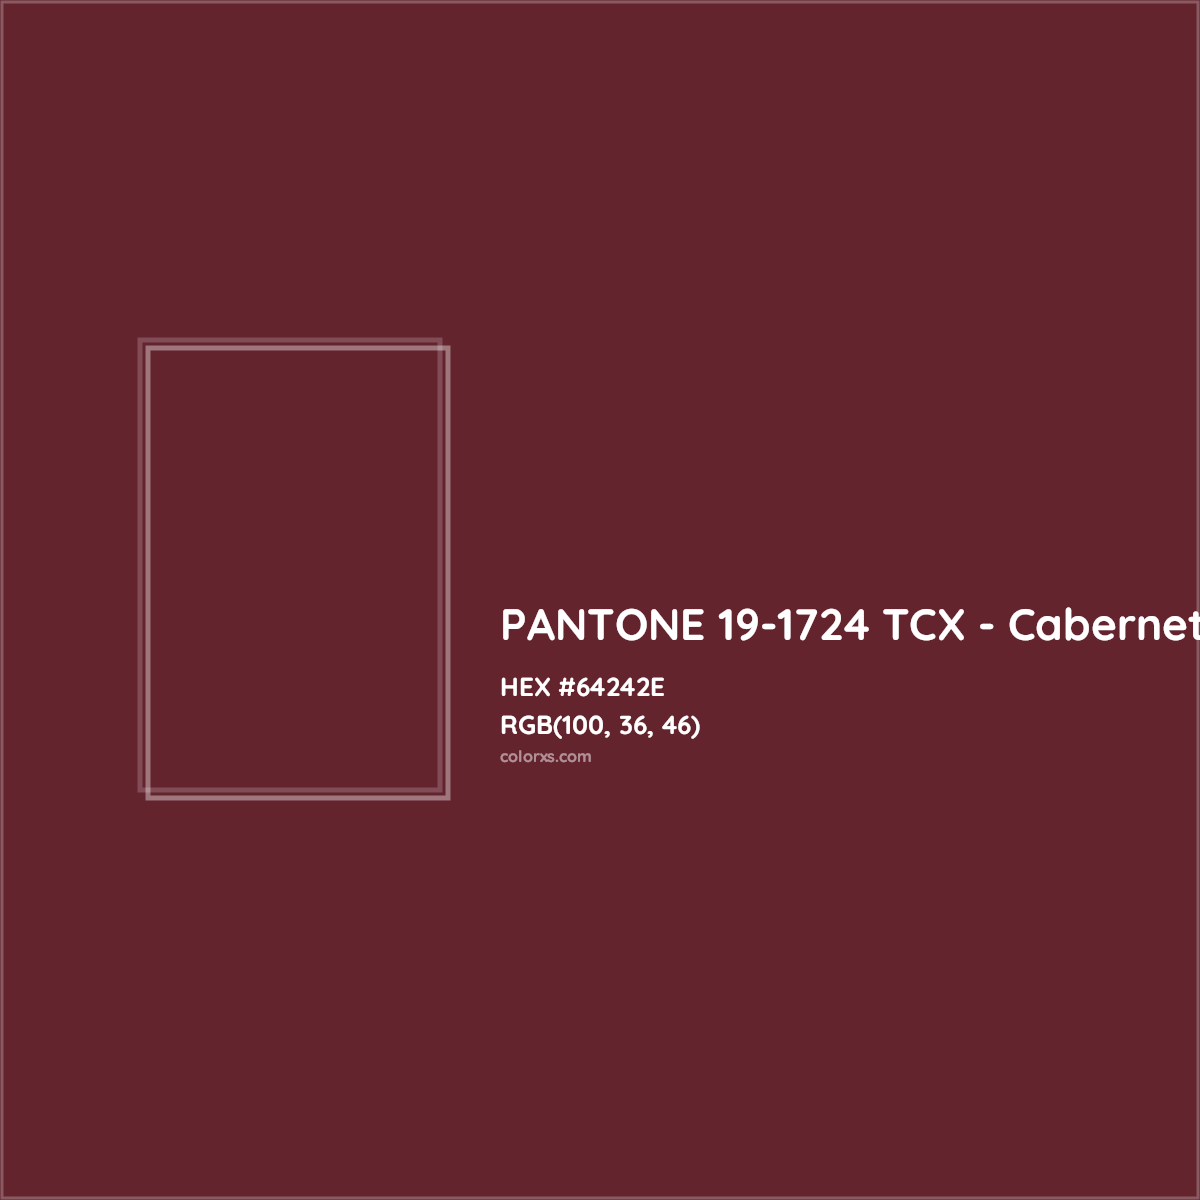 Haute Red (Pantone) color hex code is #A11729